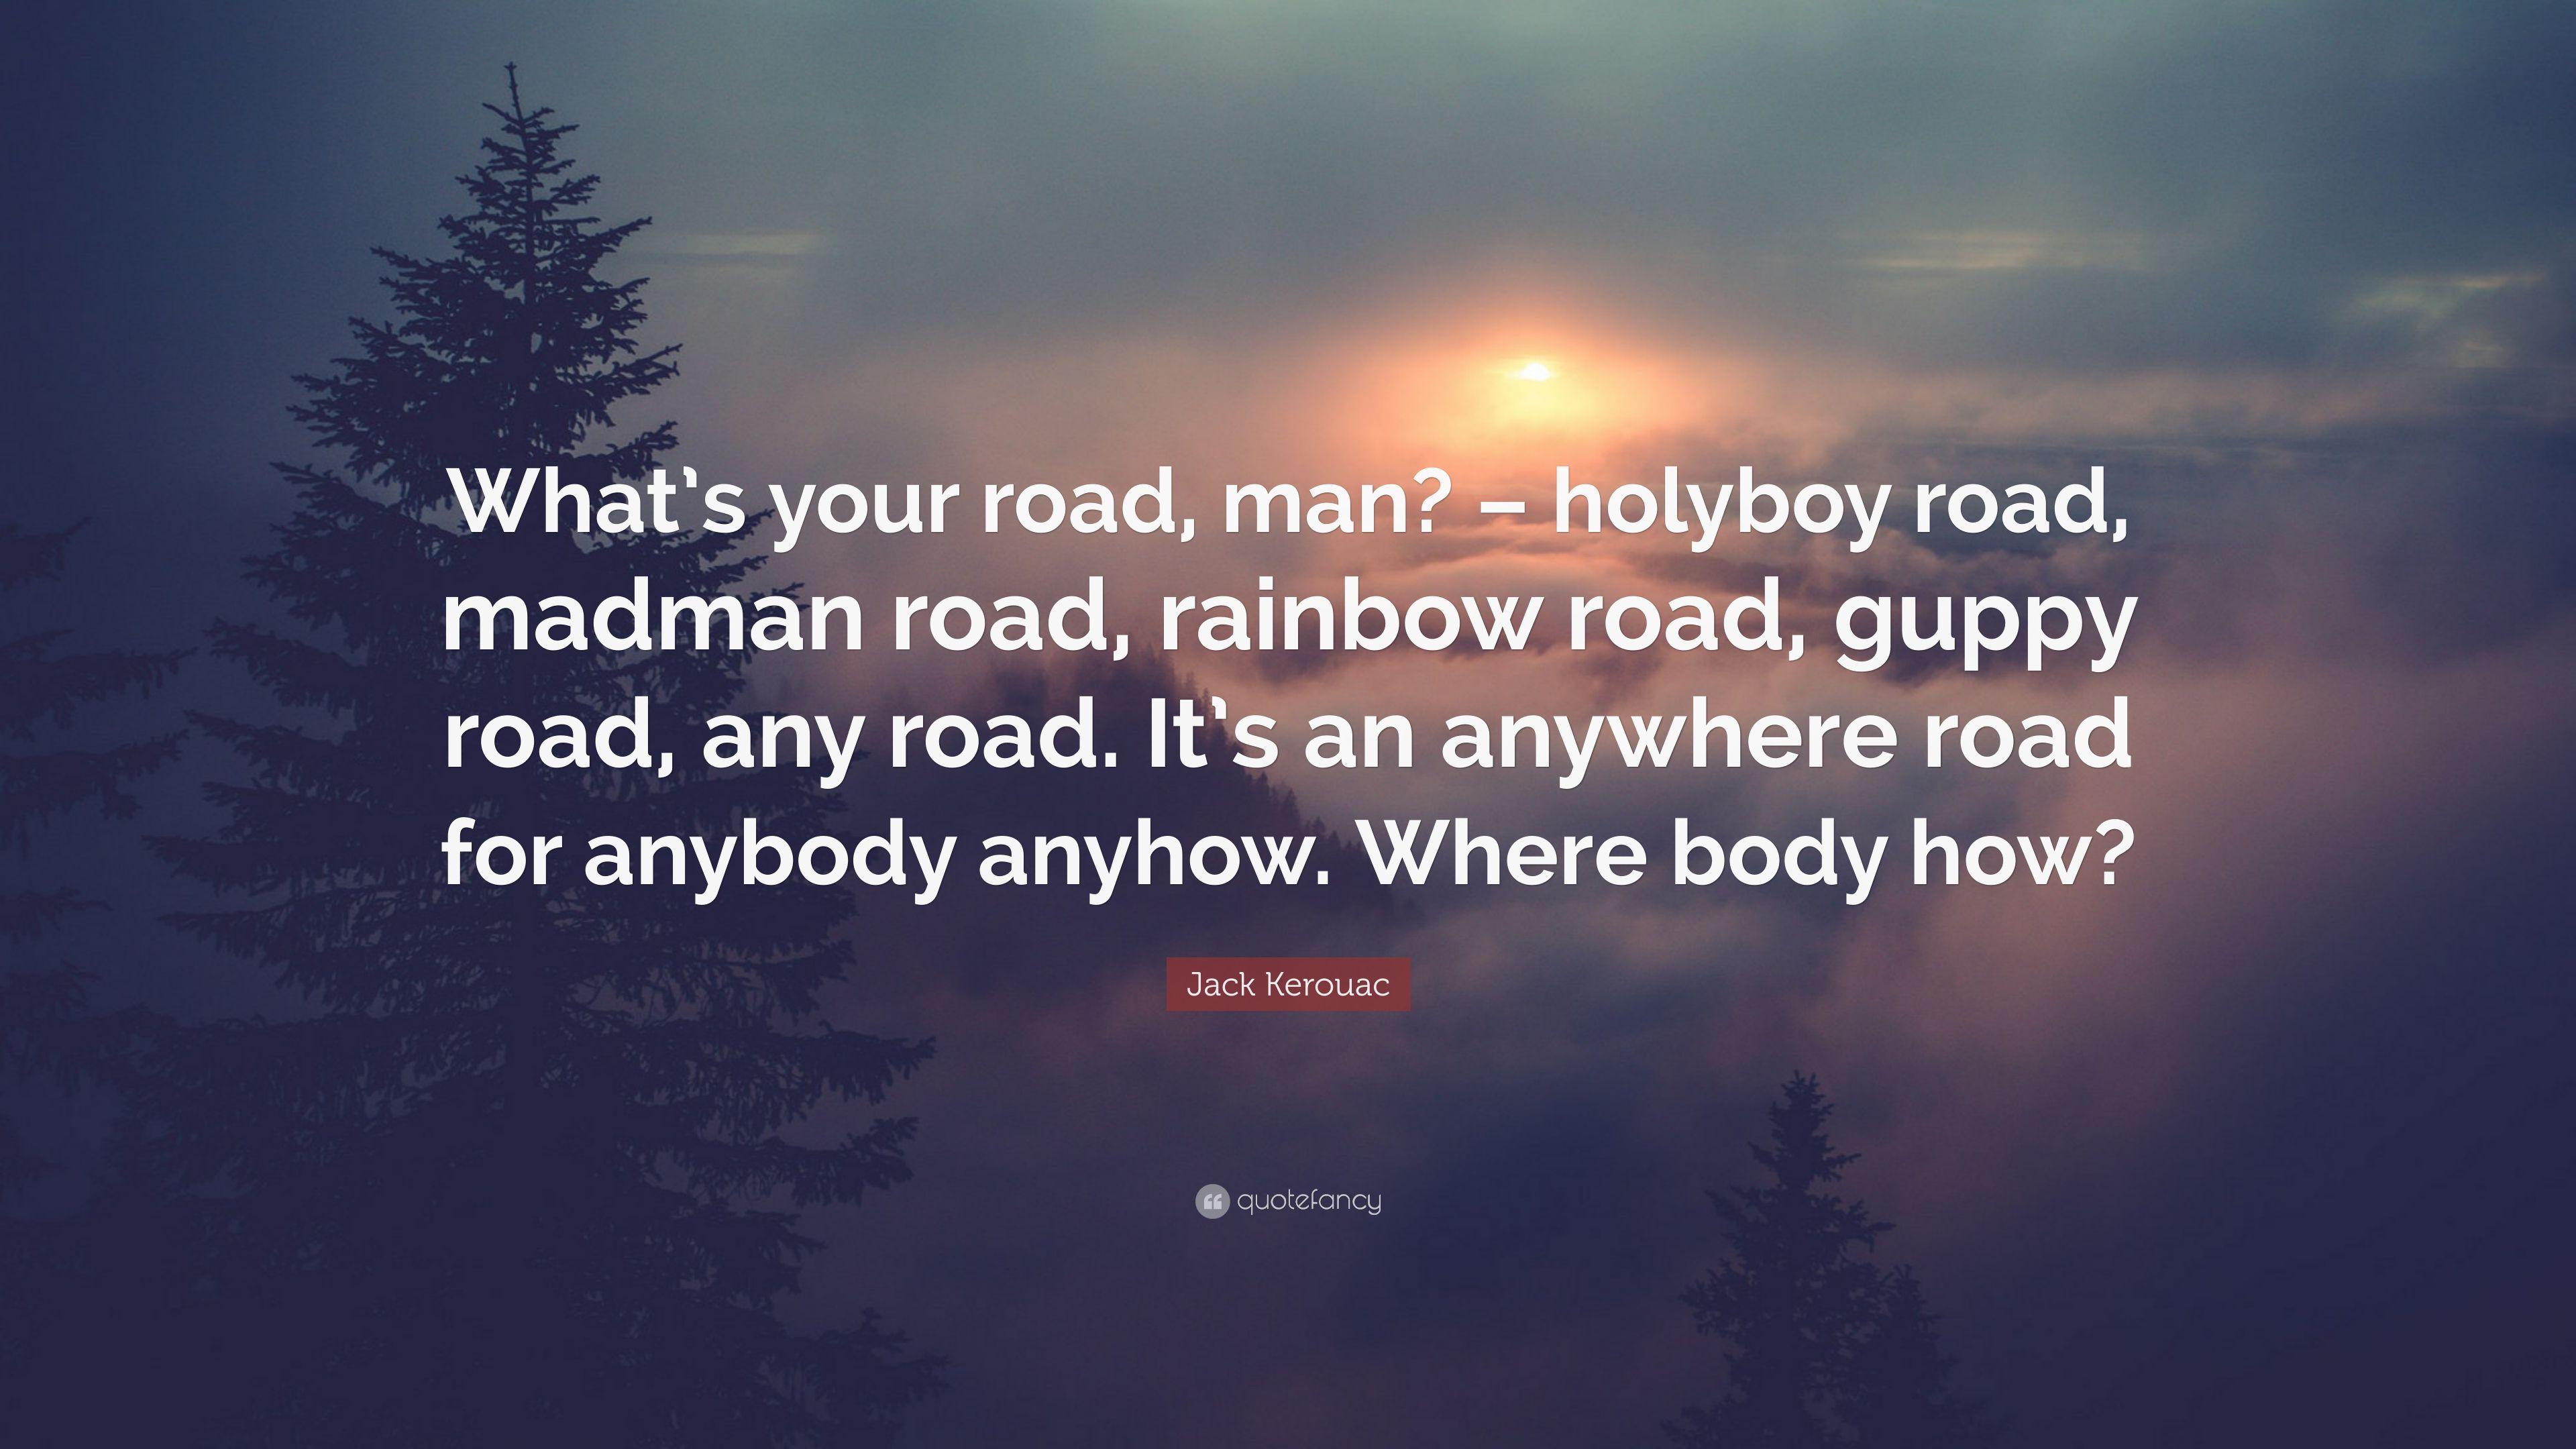 Jack Kerouac Quote: “What's your road, man?